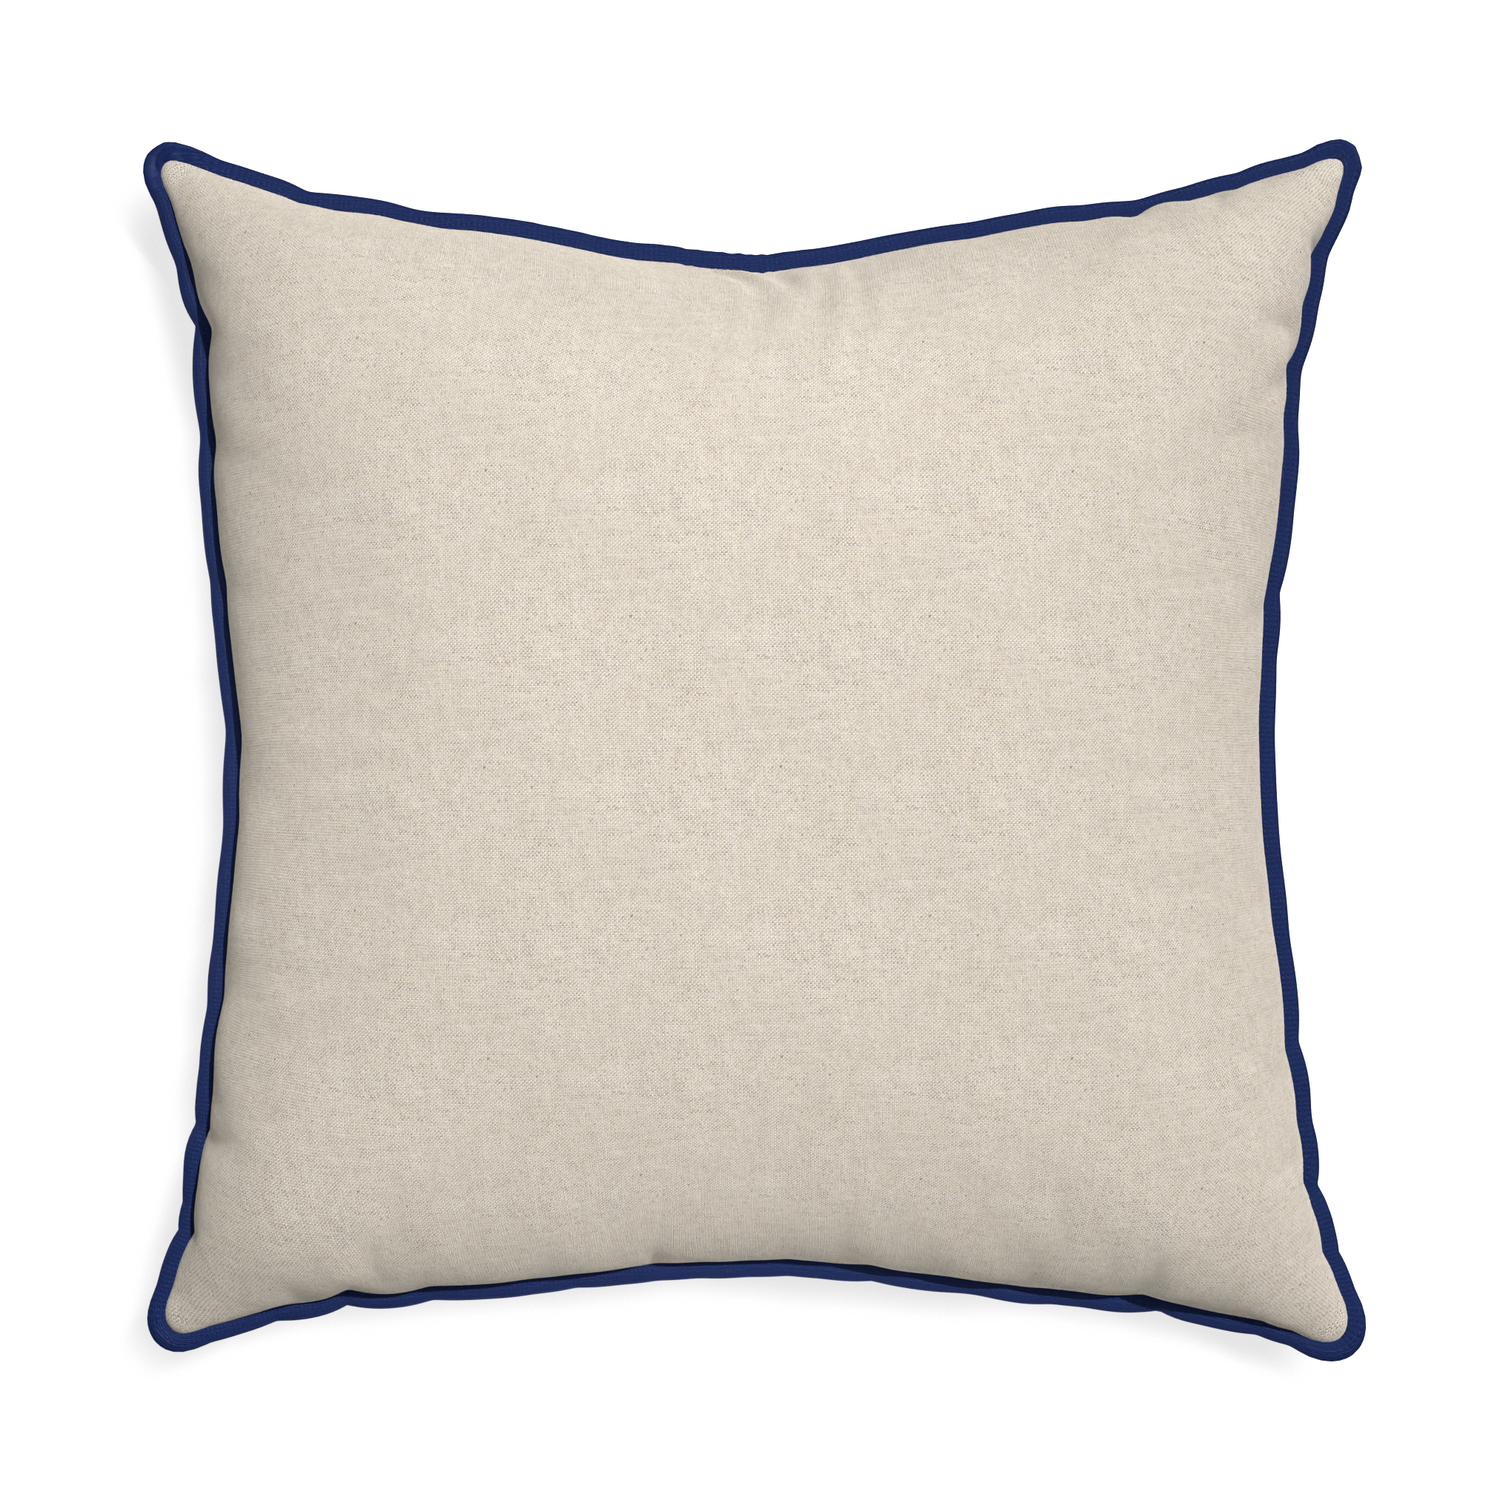 Euro-sham oat custom light brownpillow with midnight piping on white background